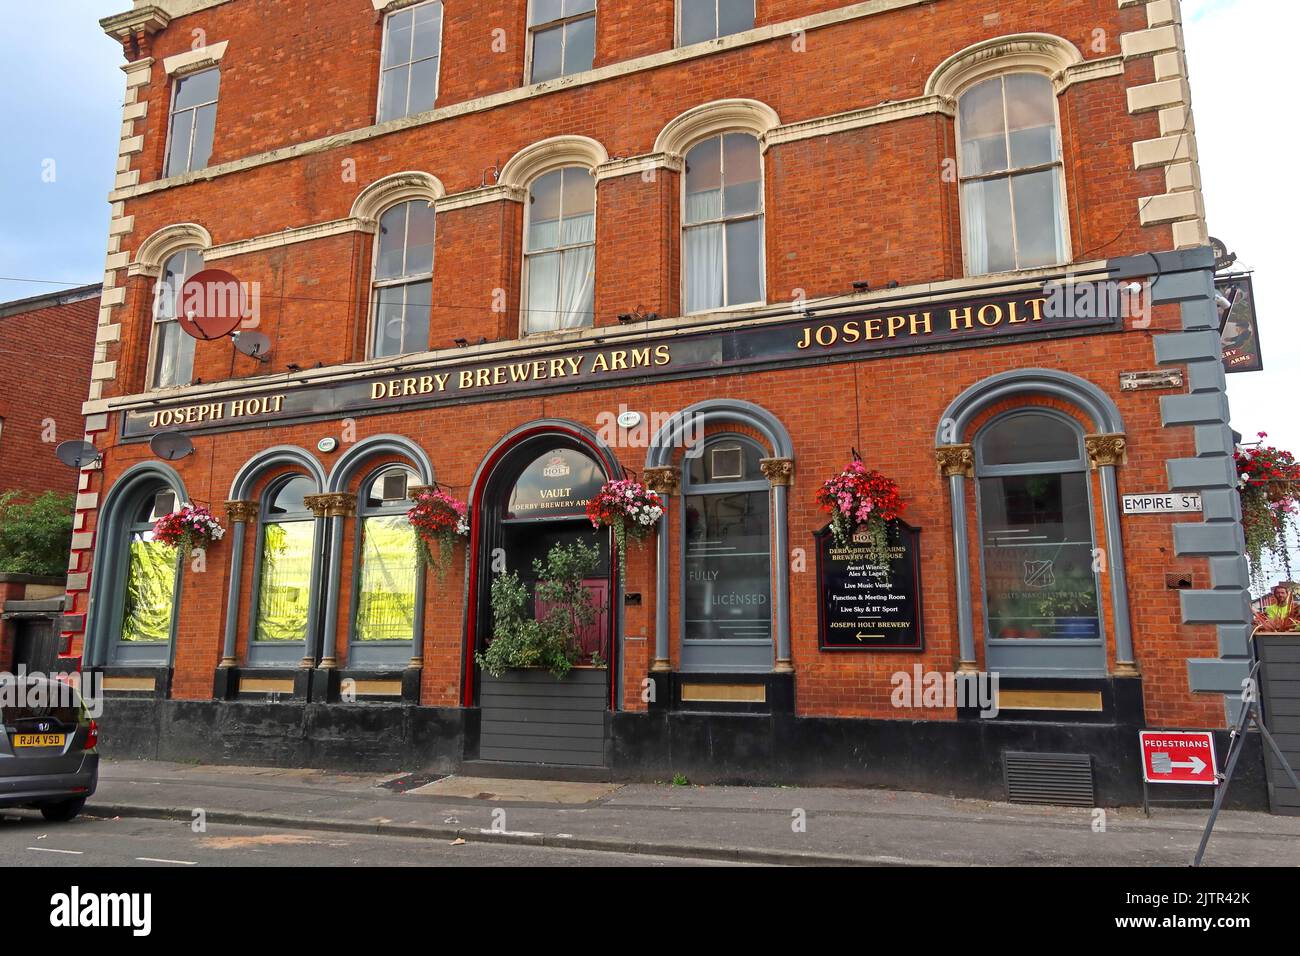 Holts Derby Brewery Arms, Empire St, Cheetham Hill, Manchester, Inghilterra, REGNO UNITO, M3 1JA Foto Stock